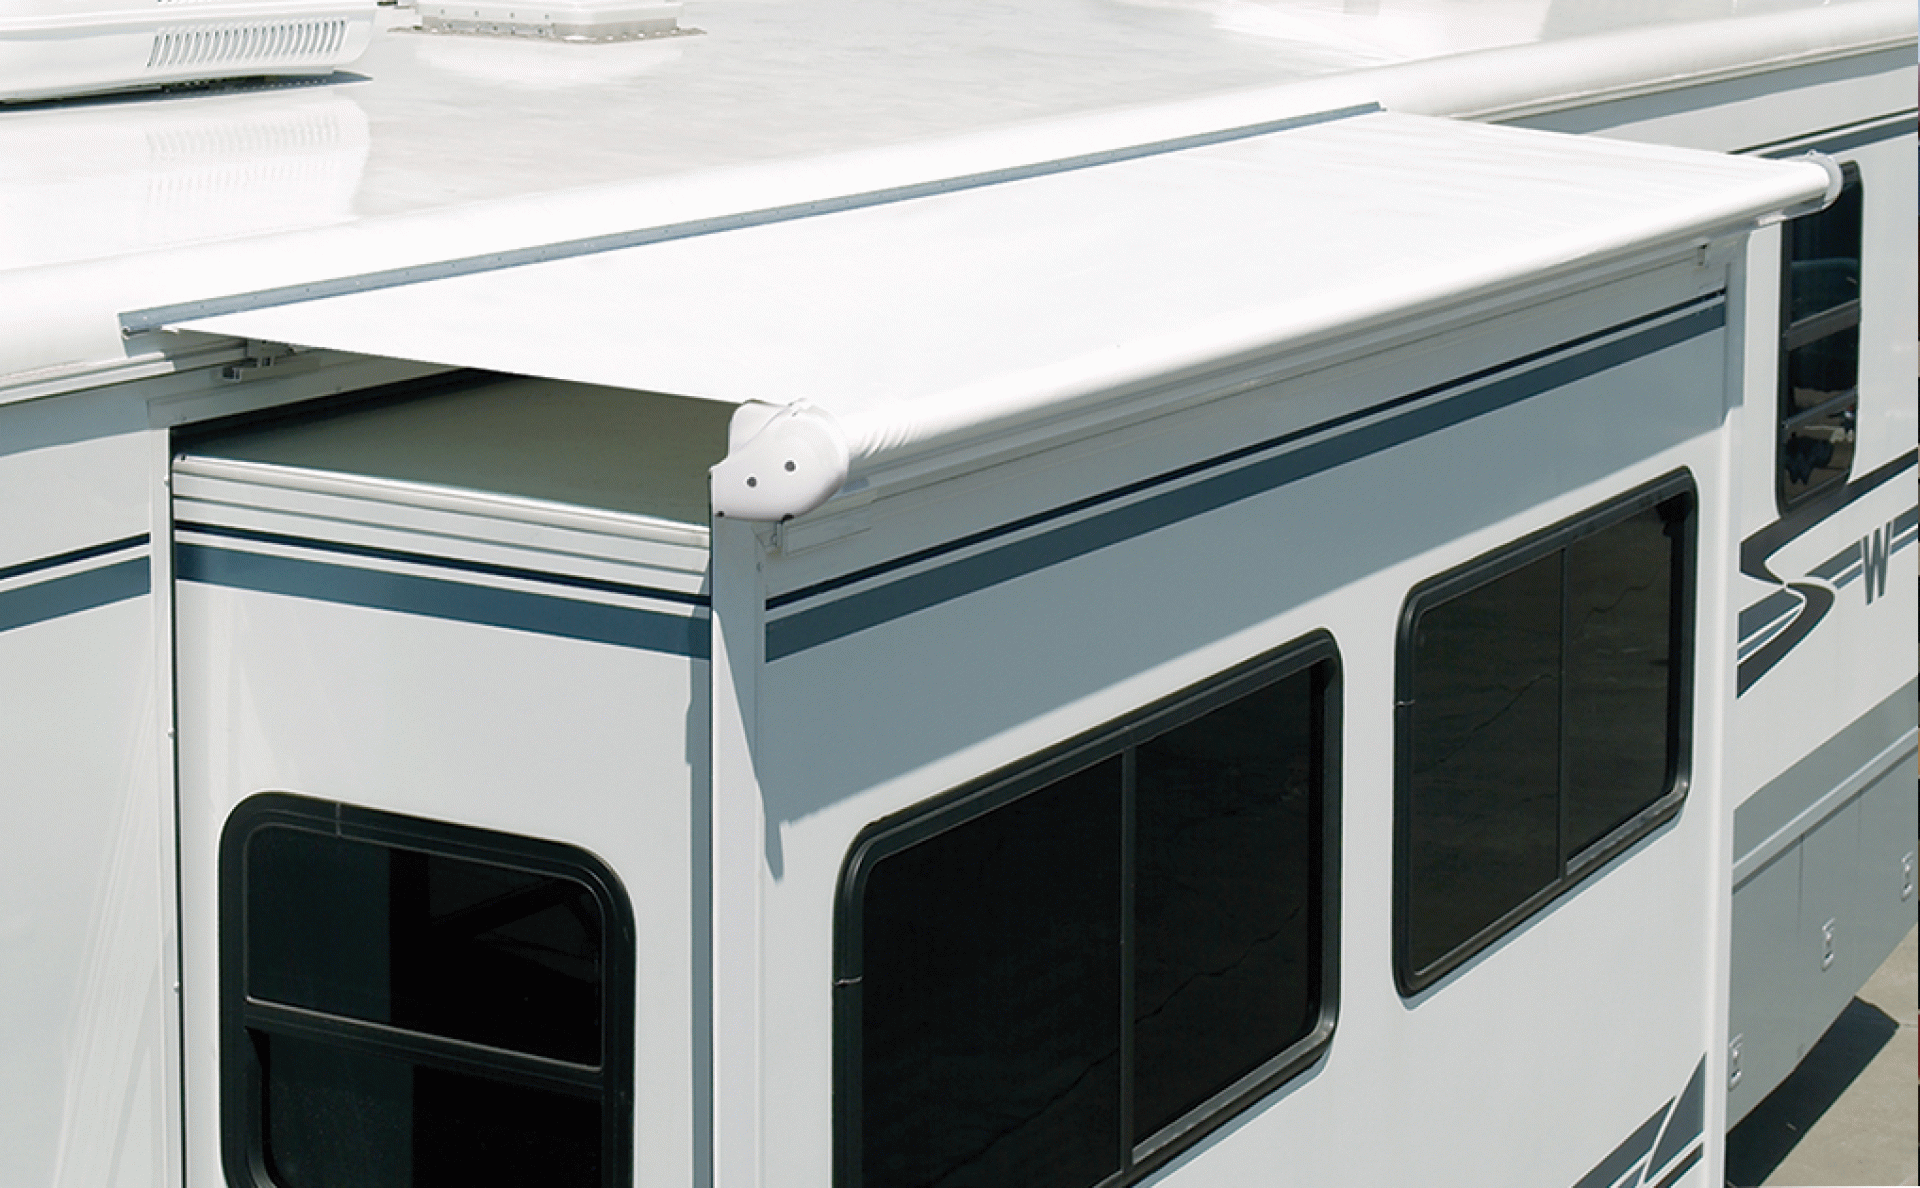 CAREFREE OF COLORADO | UQ1770025 | SIDEOUT KOVER III AWNING 174" - 177" ROOF RANGE WHITE VINYL FABRIC & DEFLECTOR